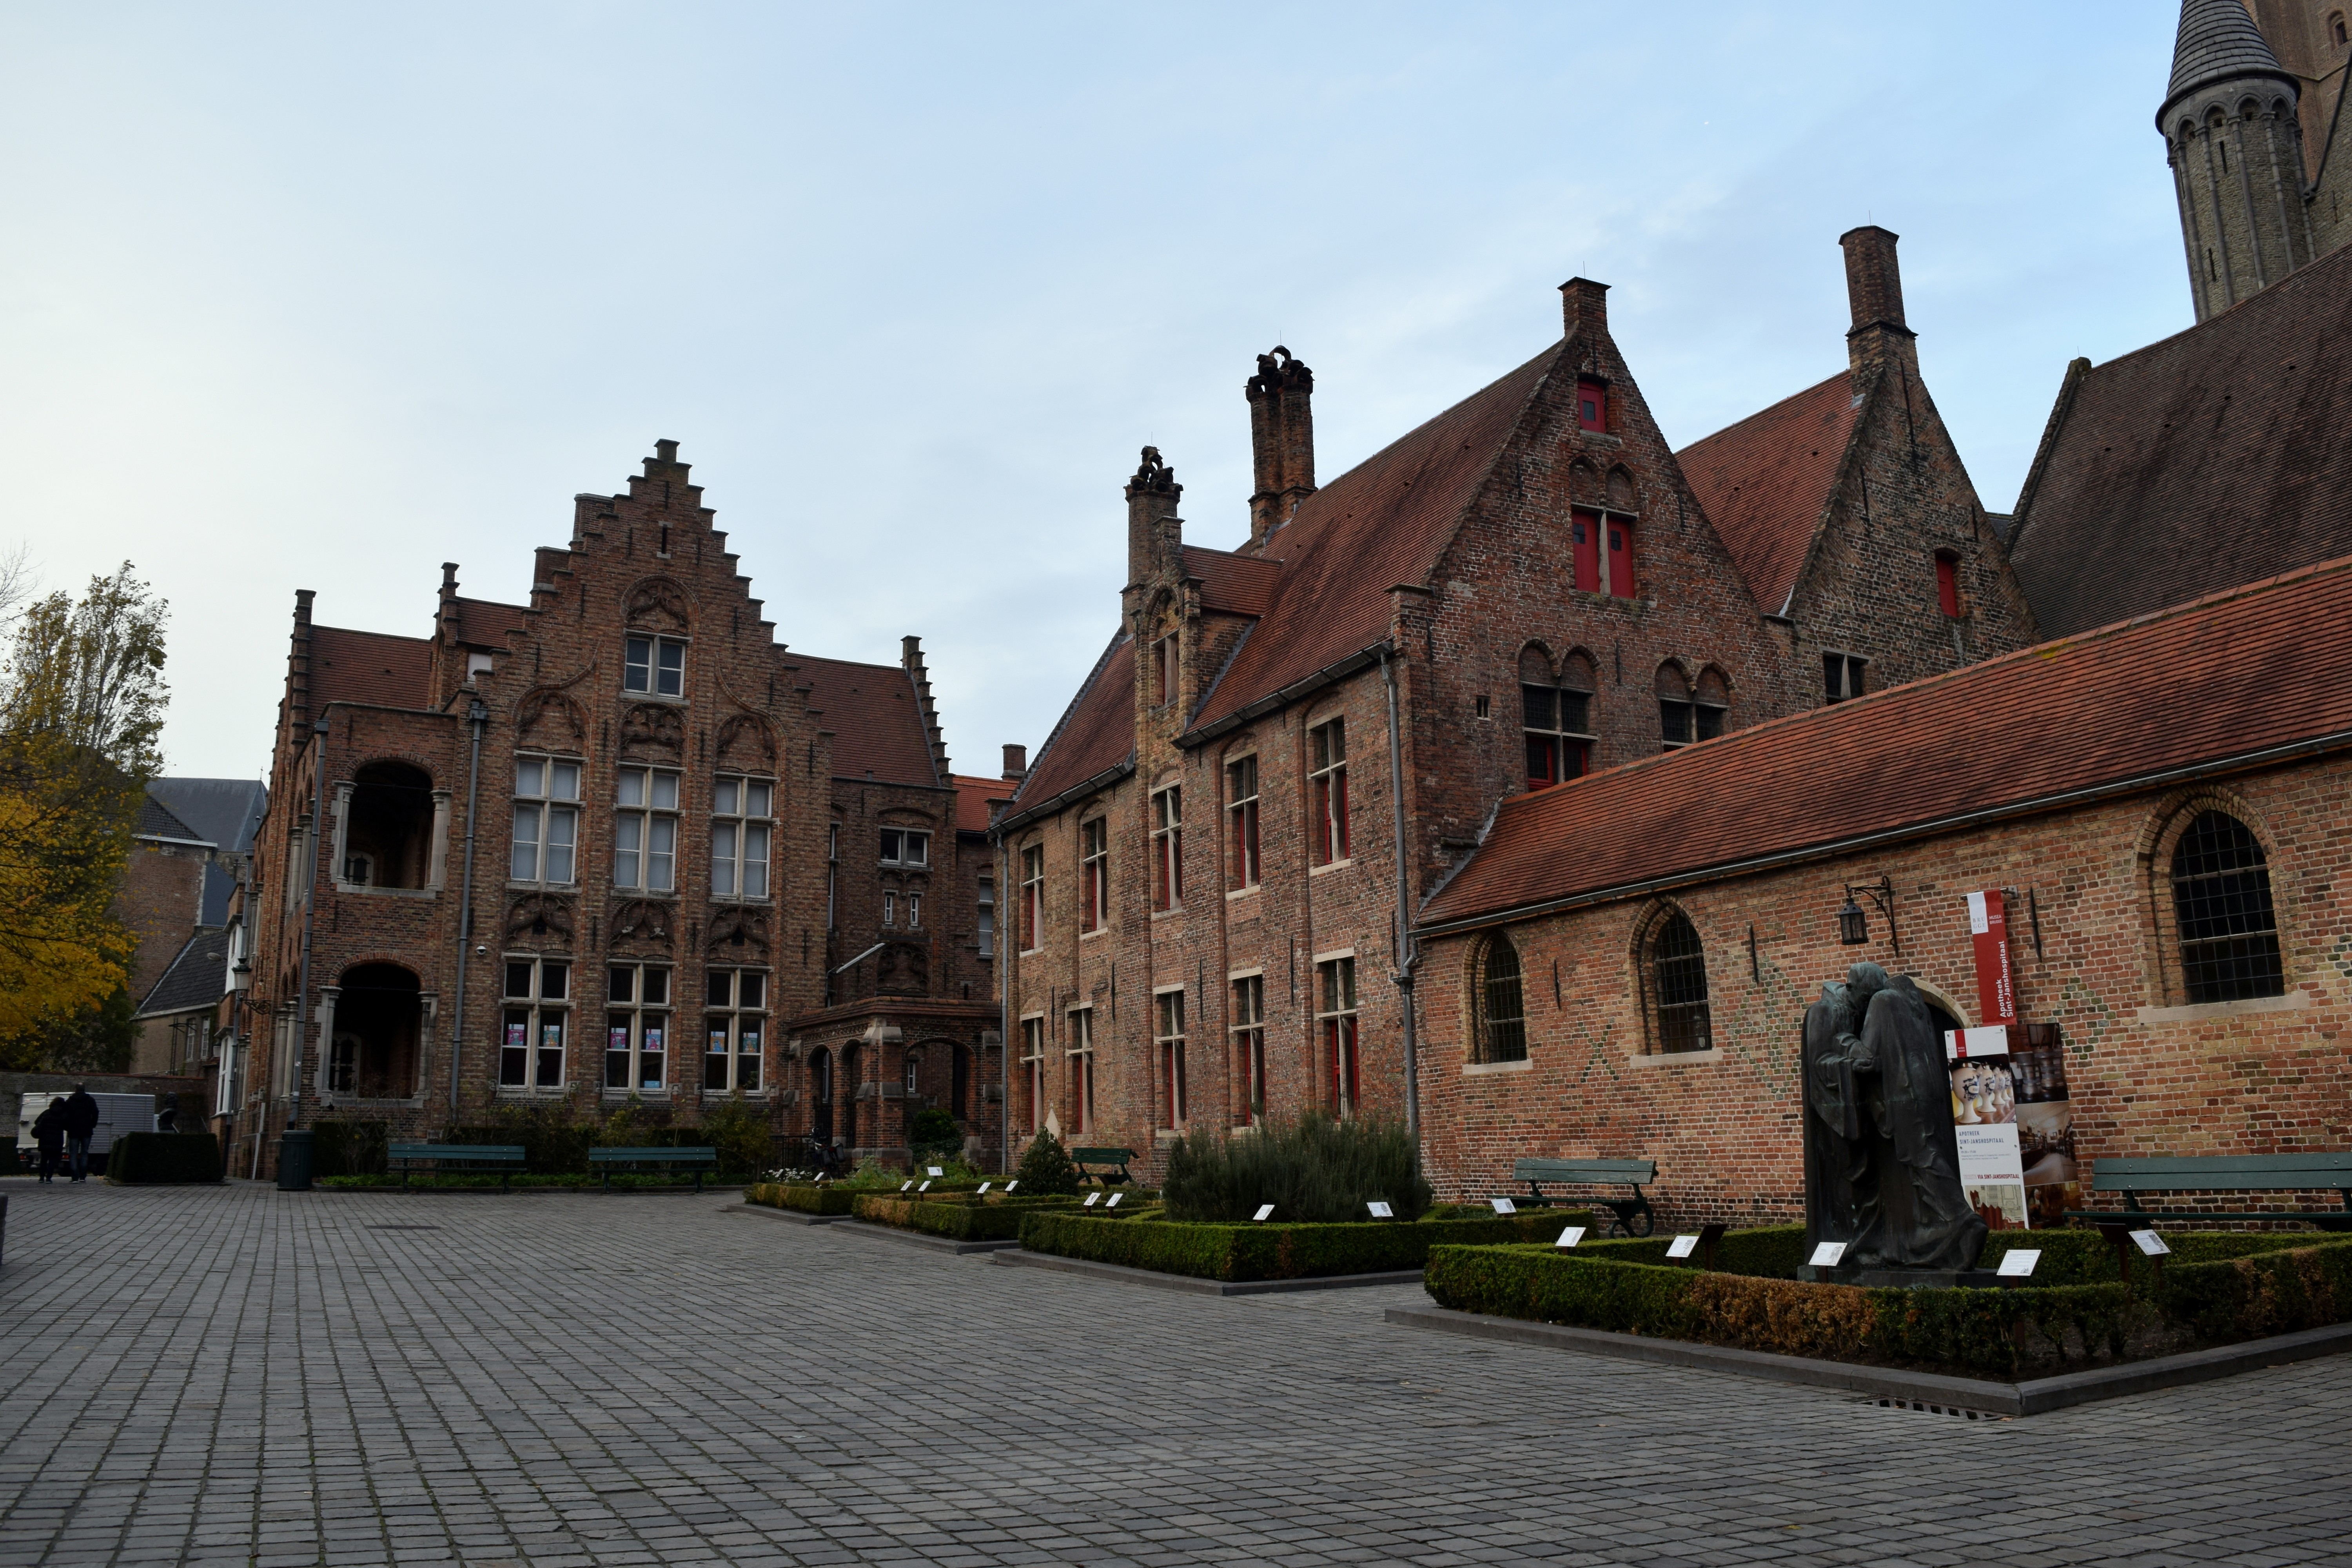 The Sint-Janshospitaal (St John’s Hospital), which once functioned as a hospital and is now a building of art with Hans Memling’s detailed devotional work for his chapel